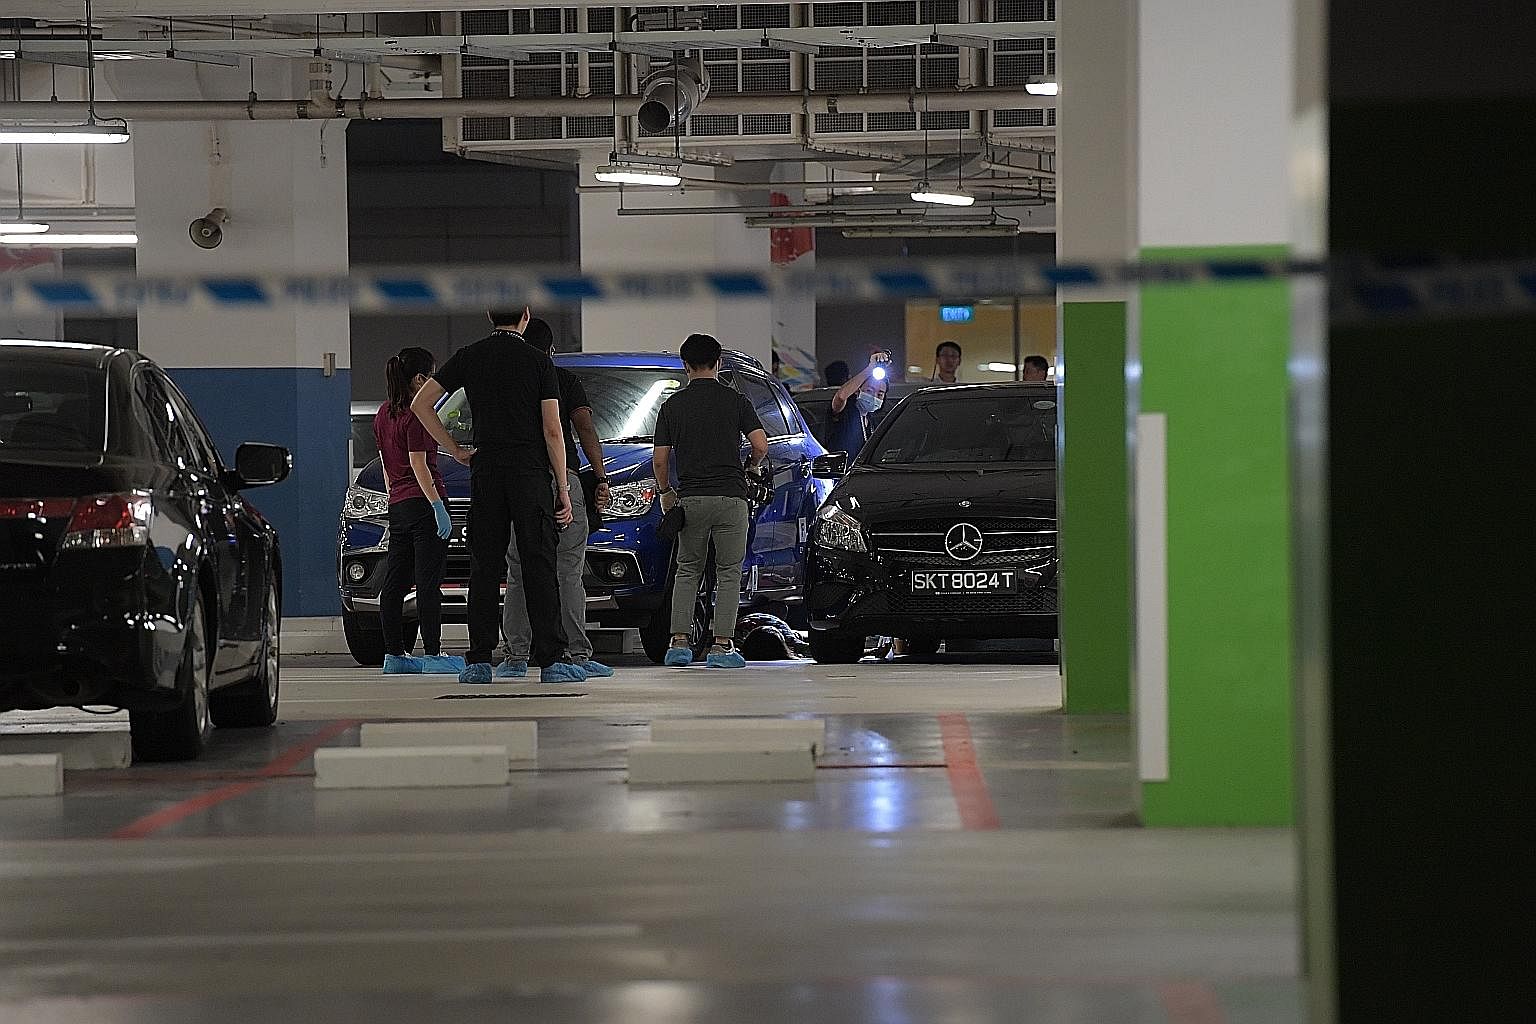 A woman believed to have been stabbed was found dead at the Institute of Technical Education (ITE) College Central campus in Ang Mo Kio yesterday evening. Police said they were alerted to an incident where a man allegedly stabbed the 56-year-old woma